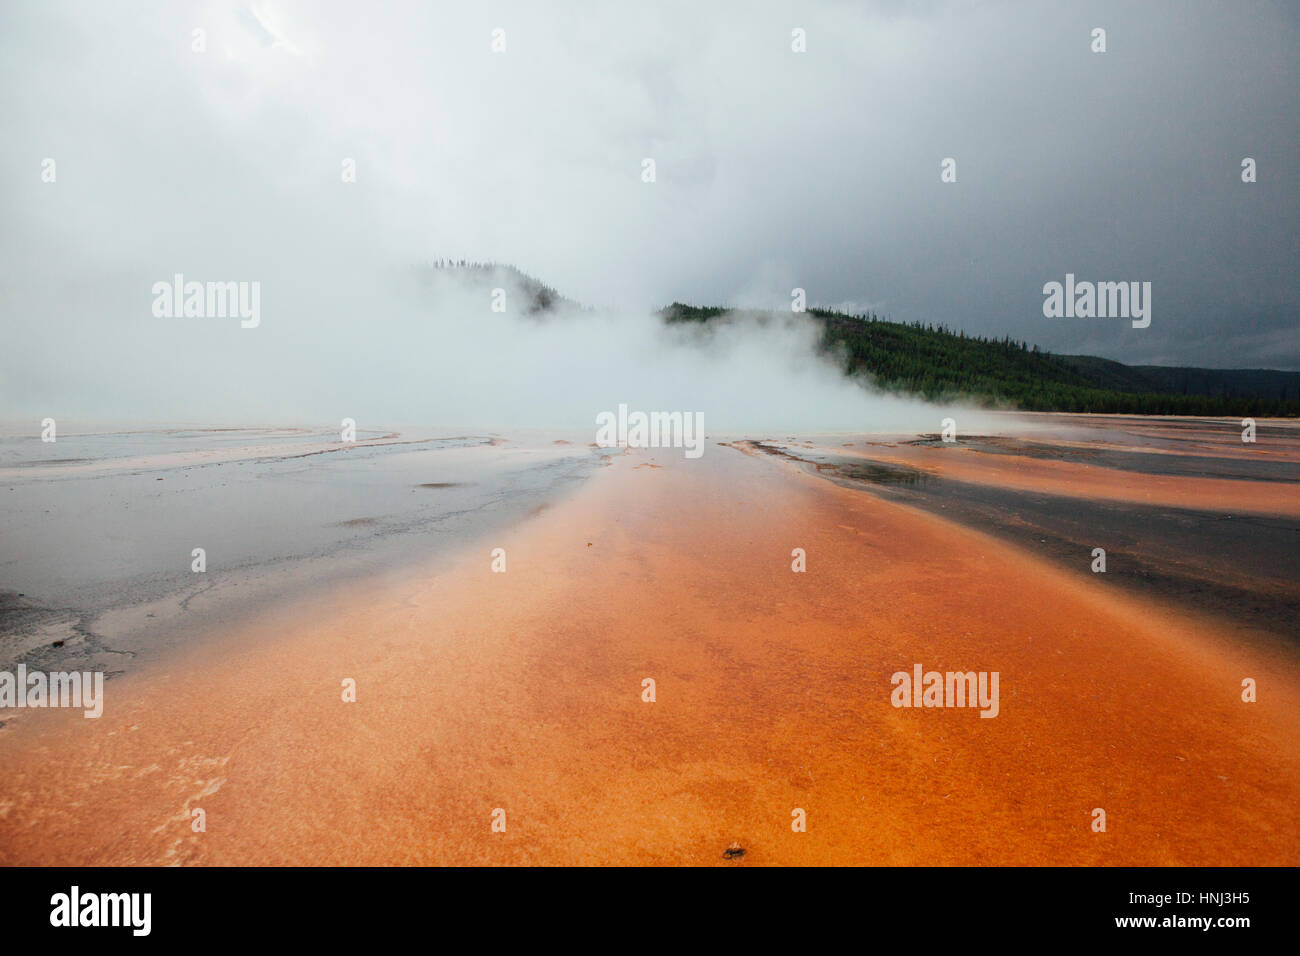 Grand prismatic spring against cloudy sky Stock Photo